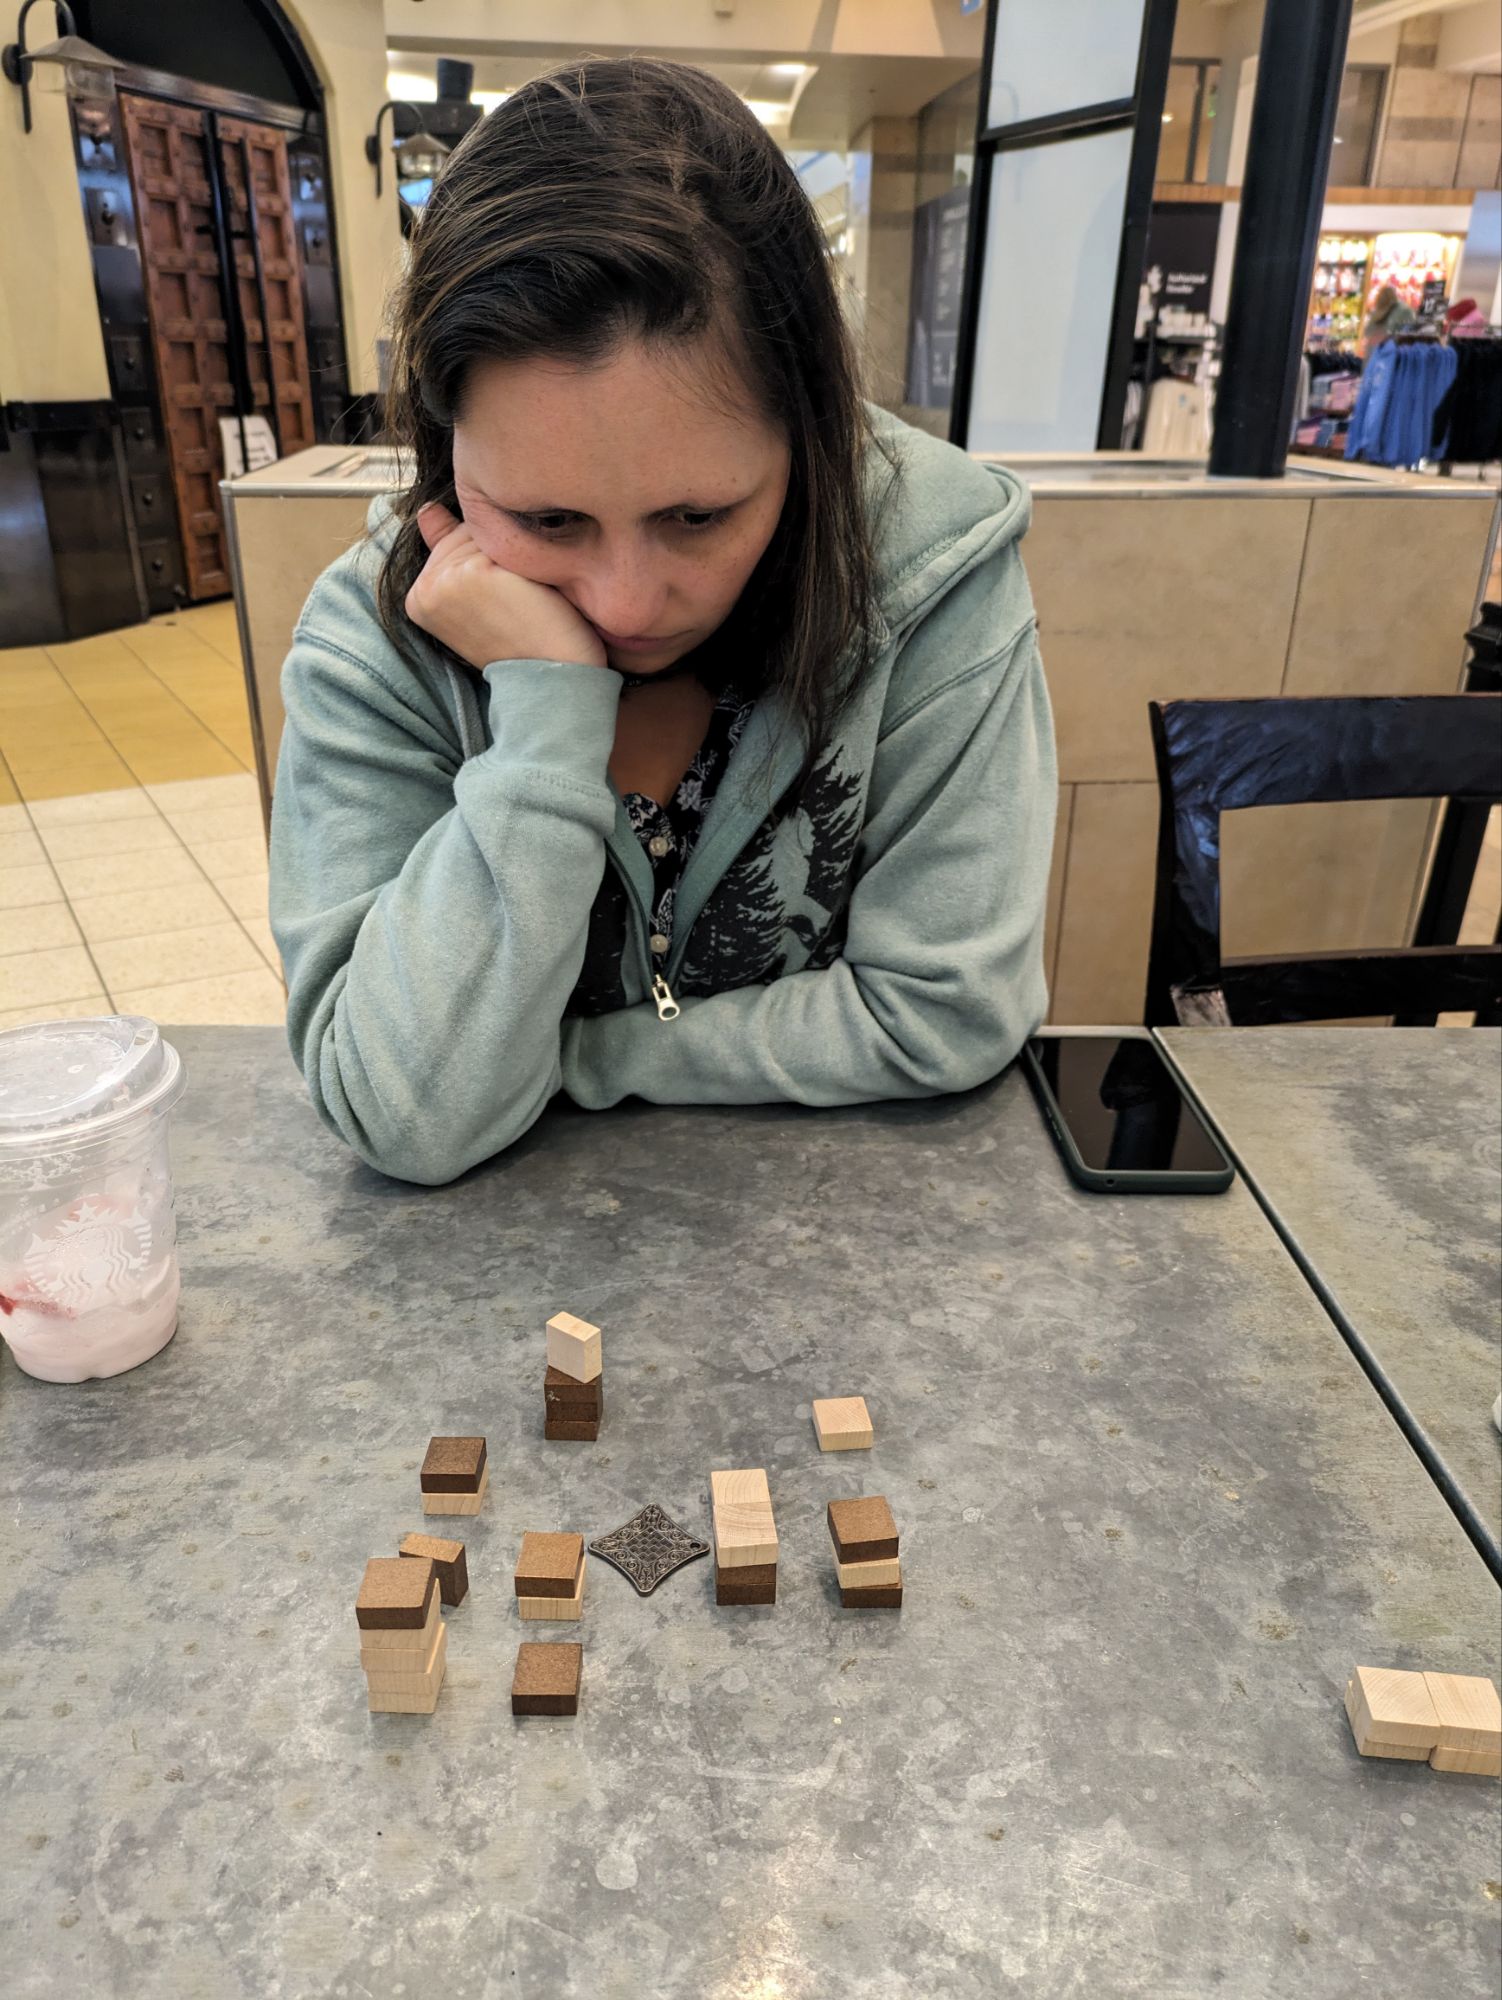 Bevin, looking like she's going to actually have a strategy for her Tak game. (But it's all a lie, she's just going to be chaotic!)